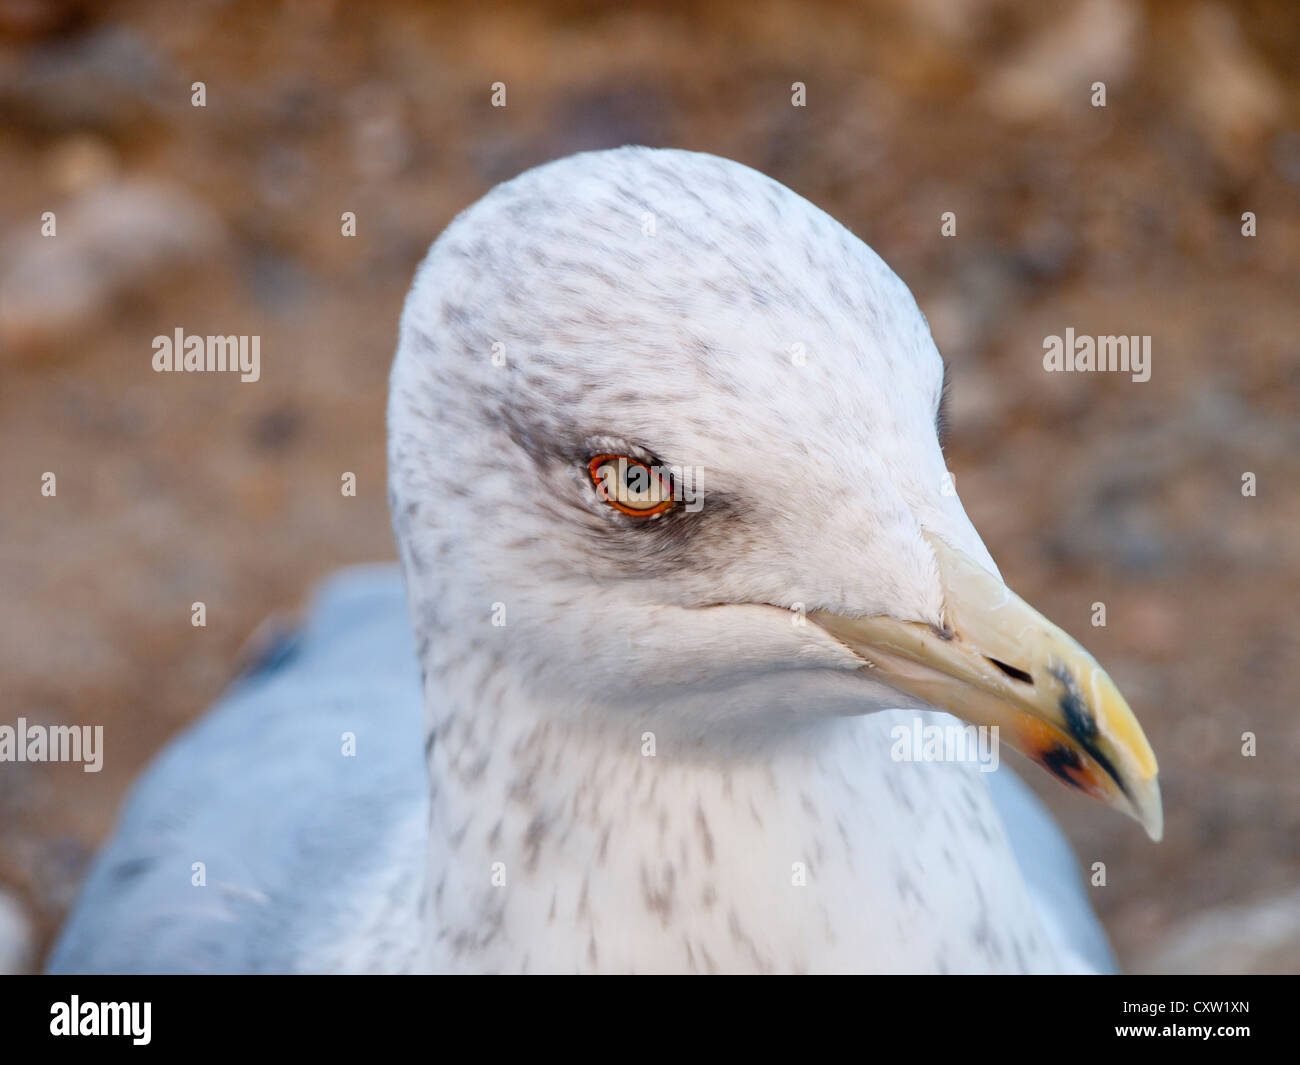 Young seagull giving an angry stare, they are plentiful around fish restaurants in Princes Islands Turkey Stock Photo